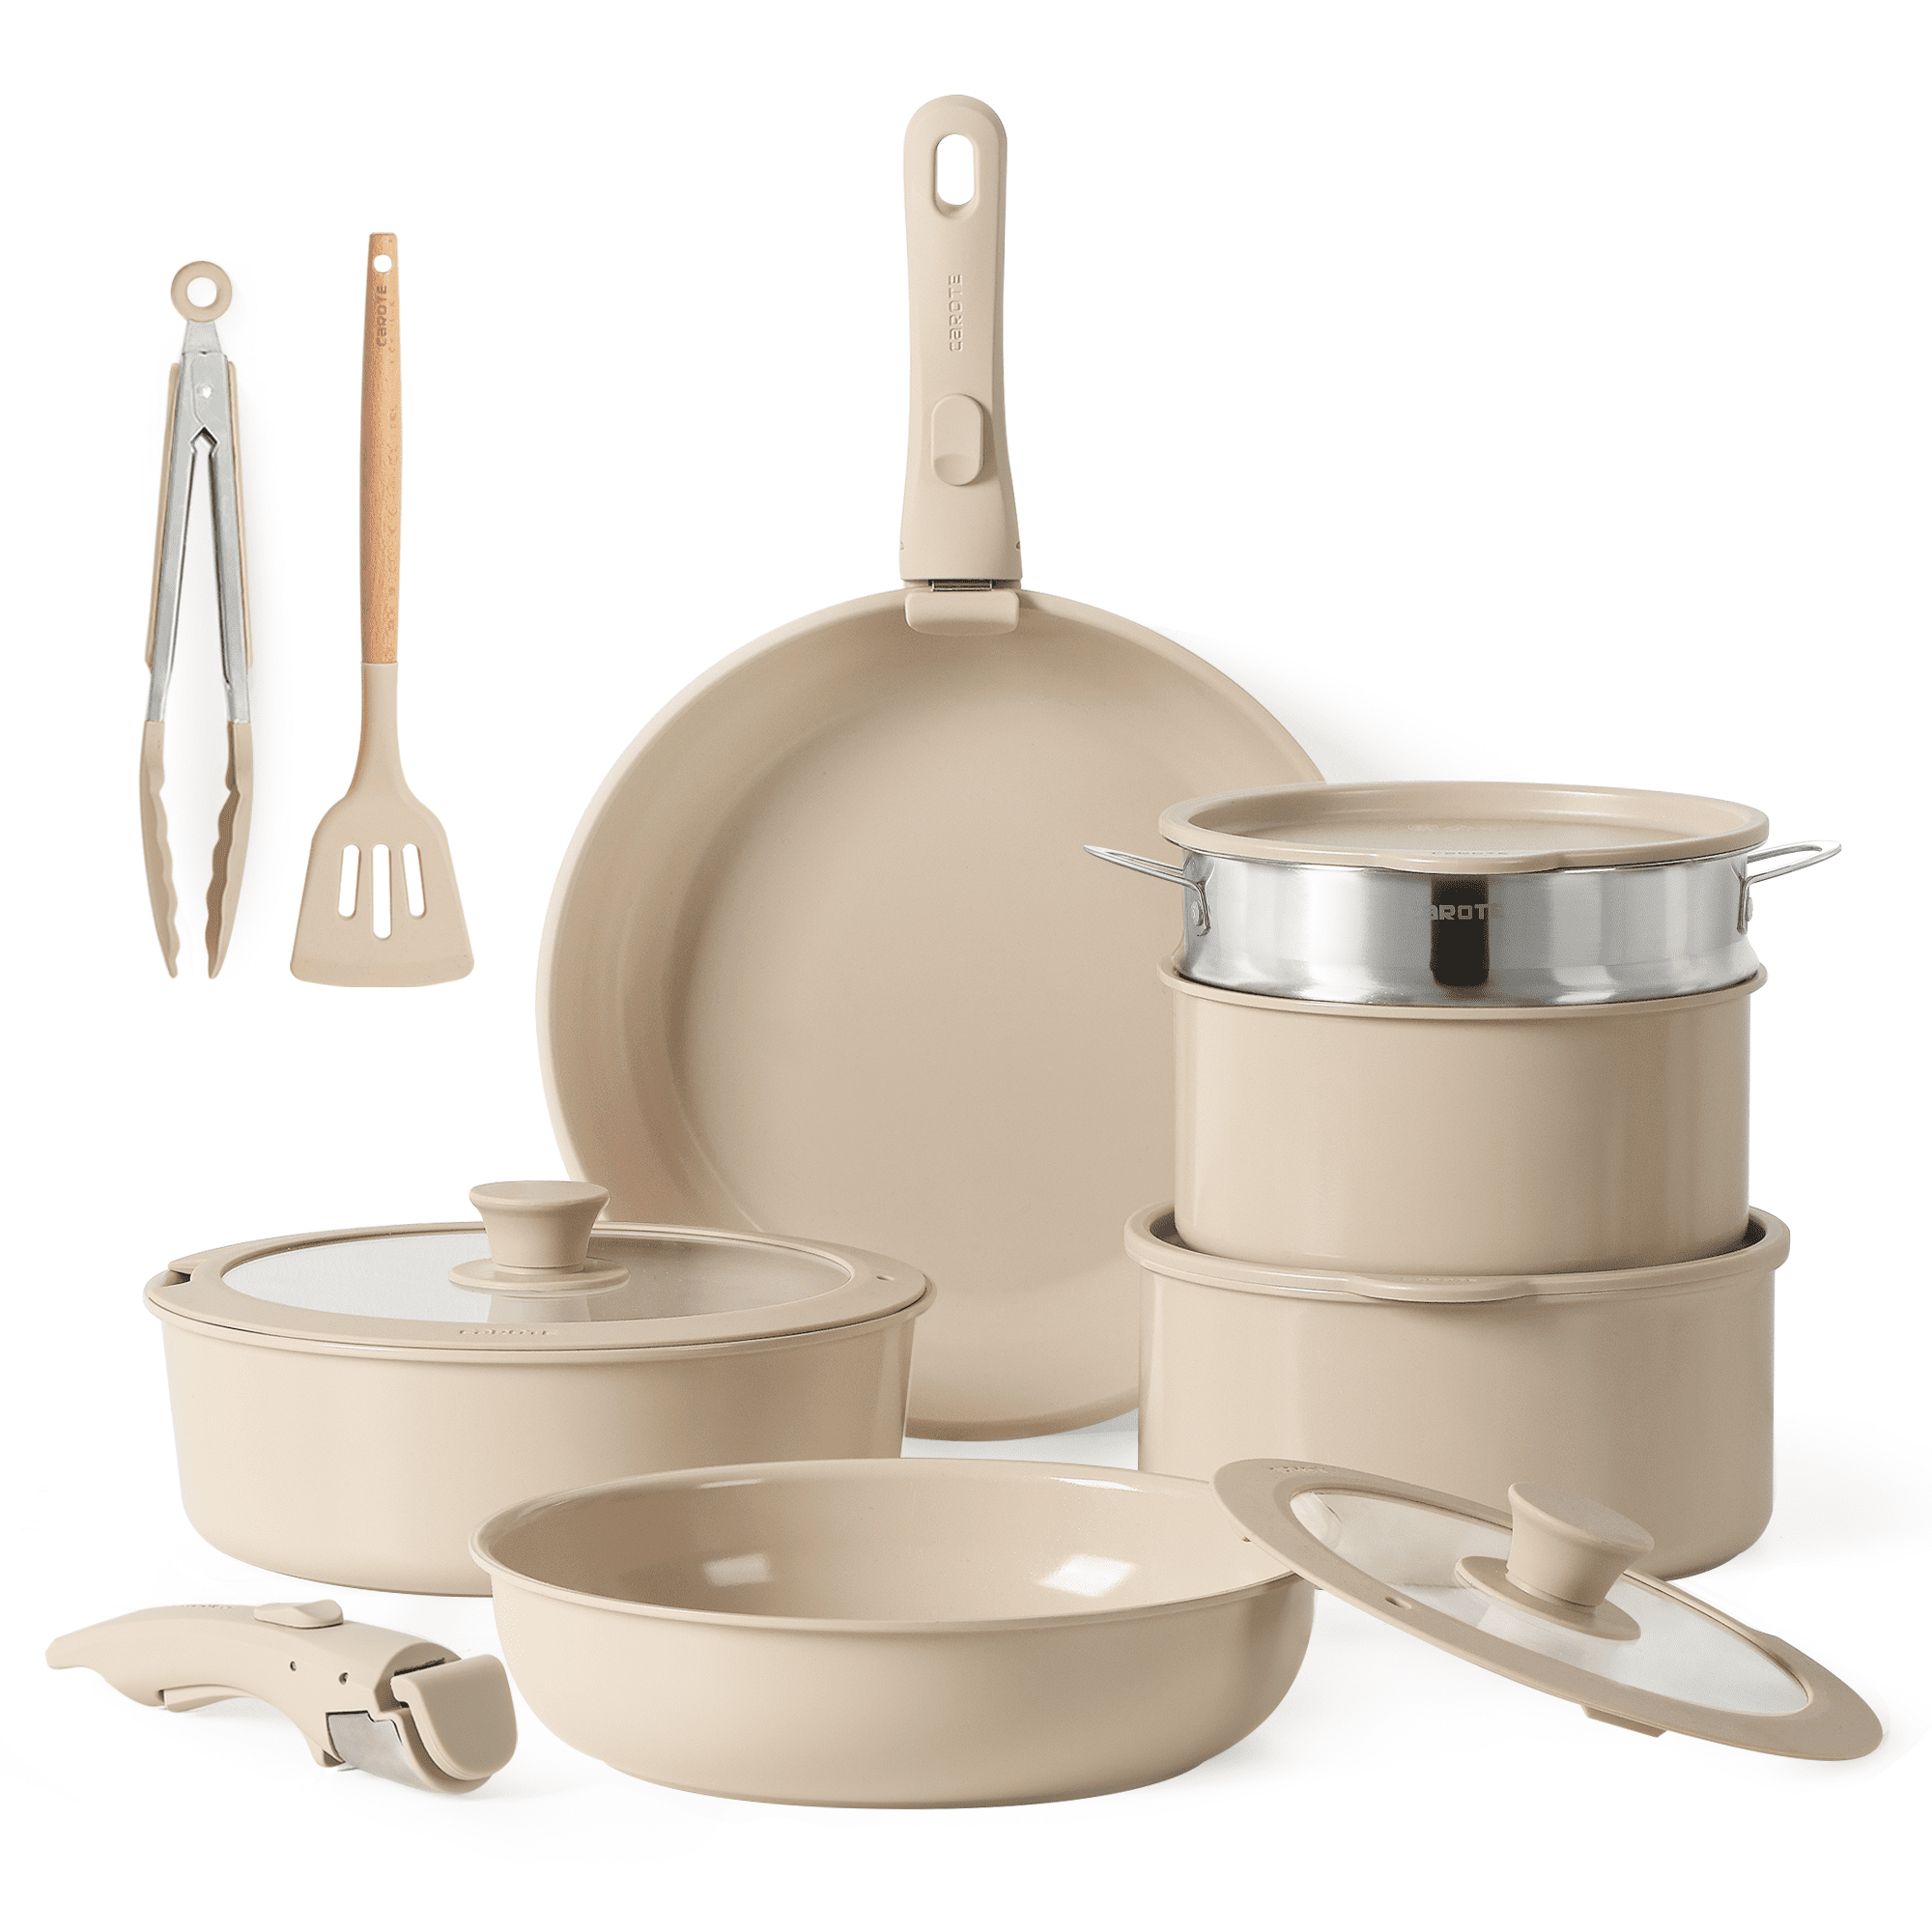 Walmart Carote cookware deal: Get a $240 Carote cookware set for under $70  - Reviewed